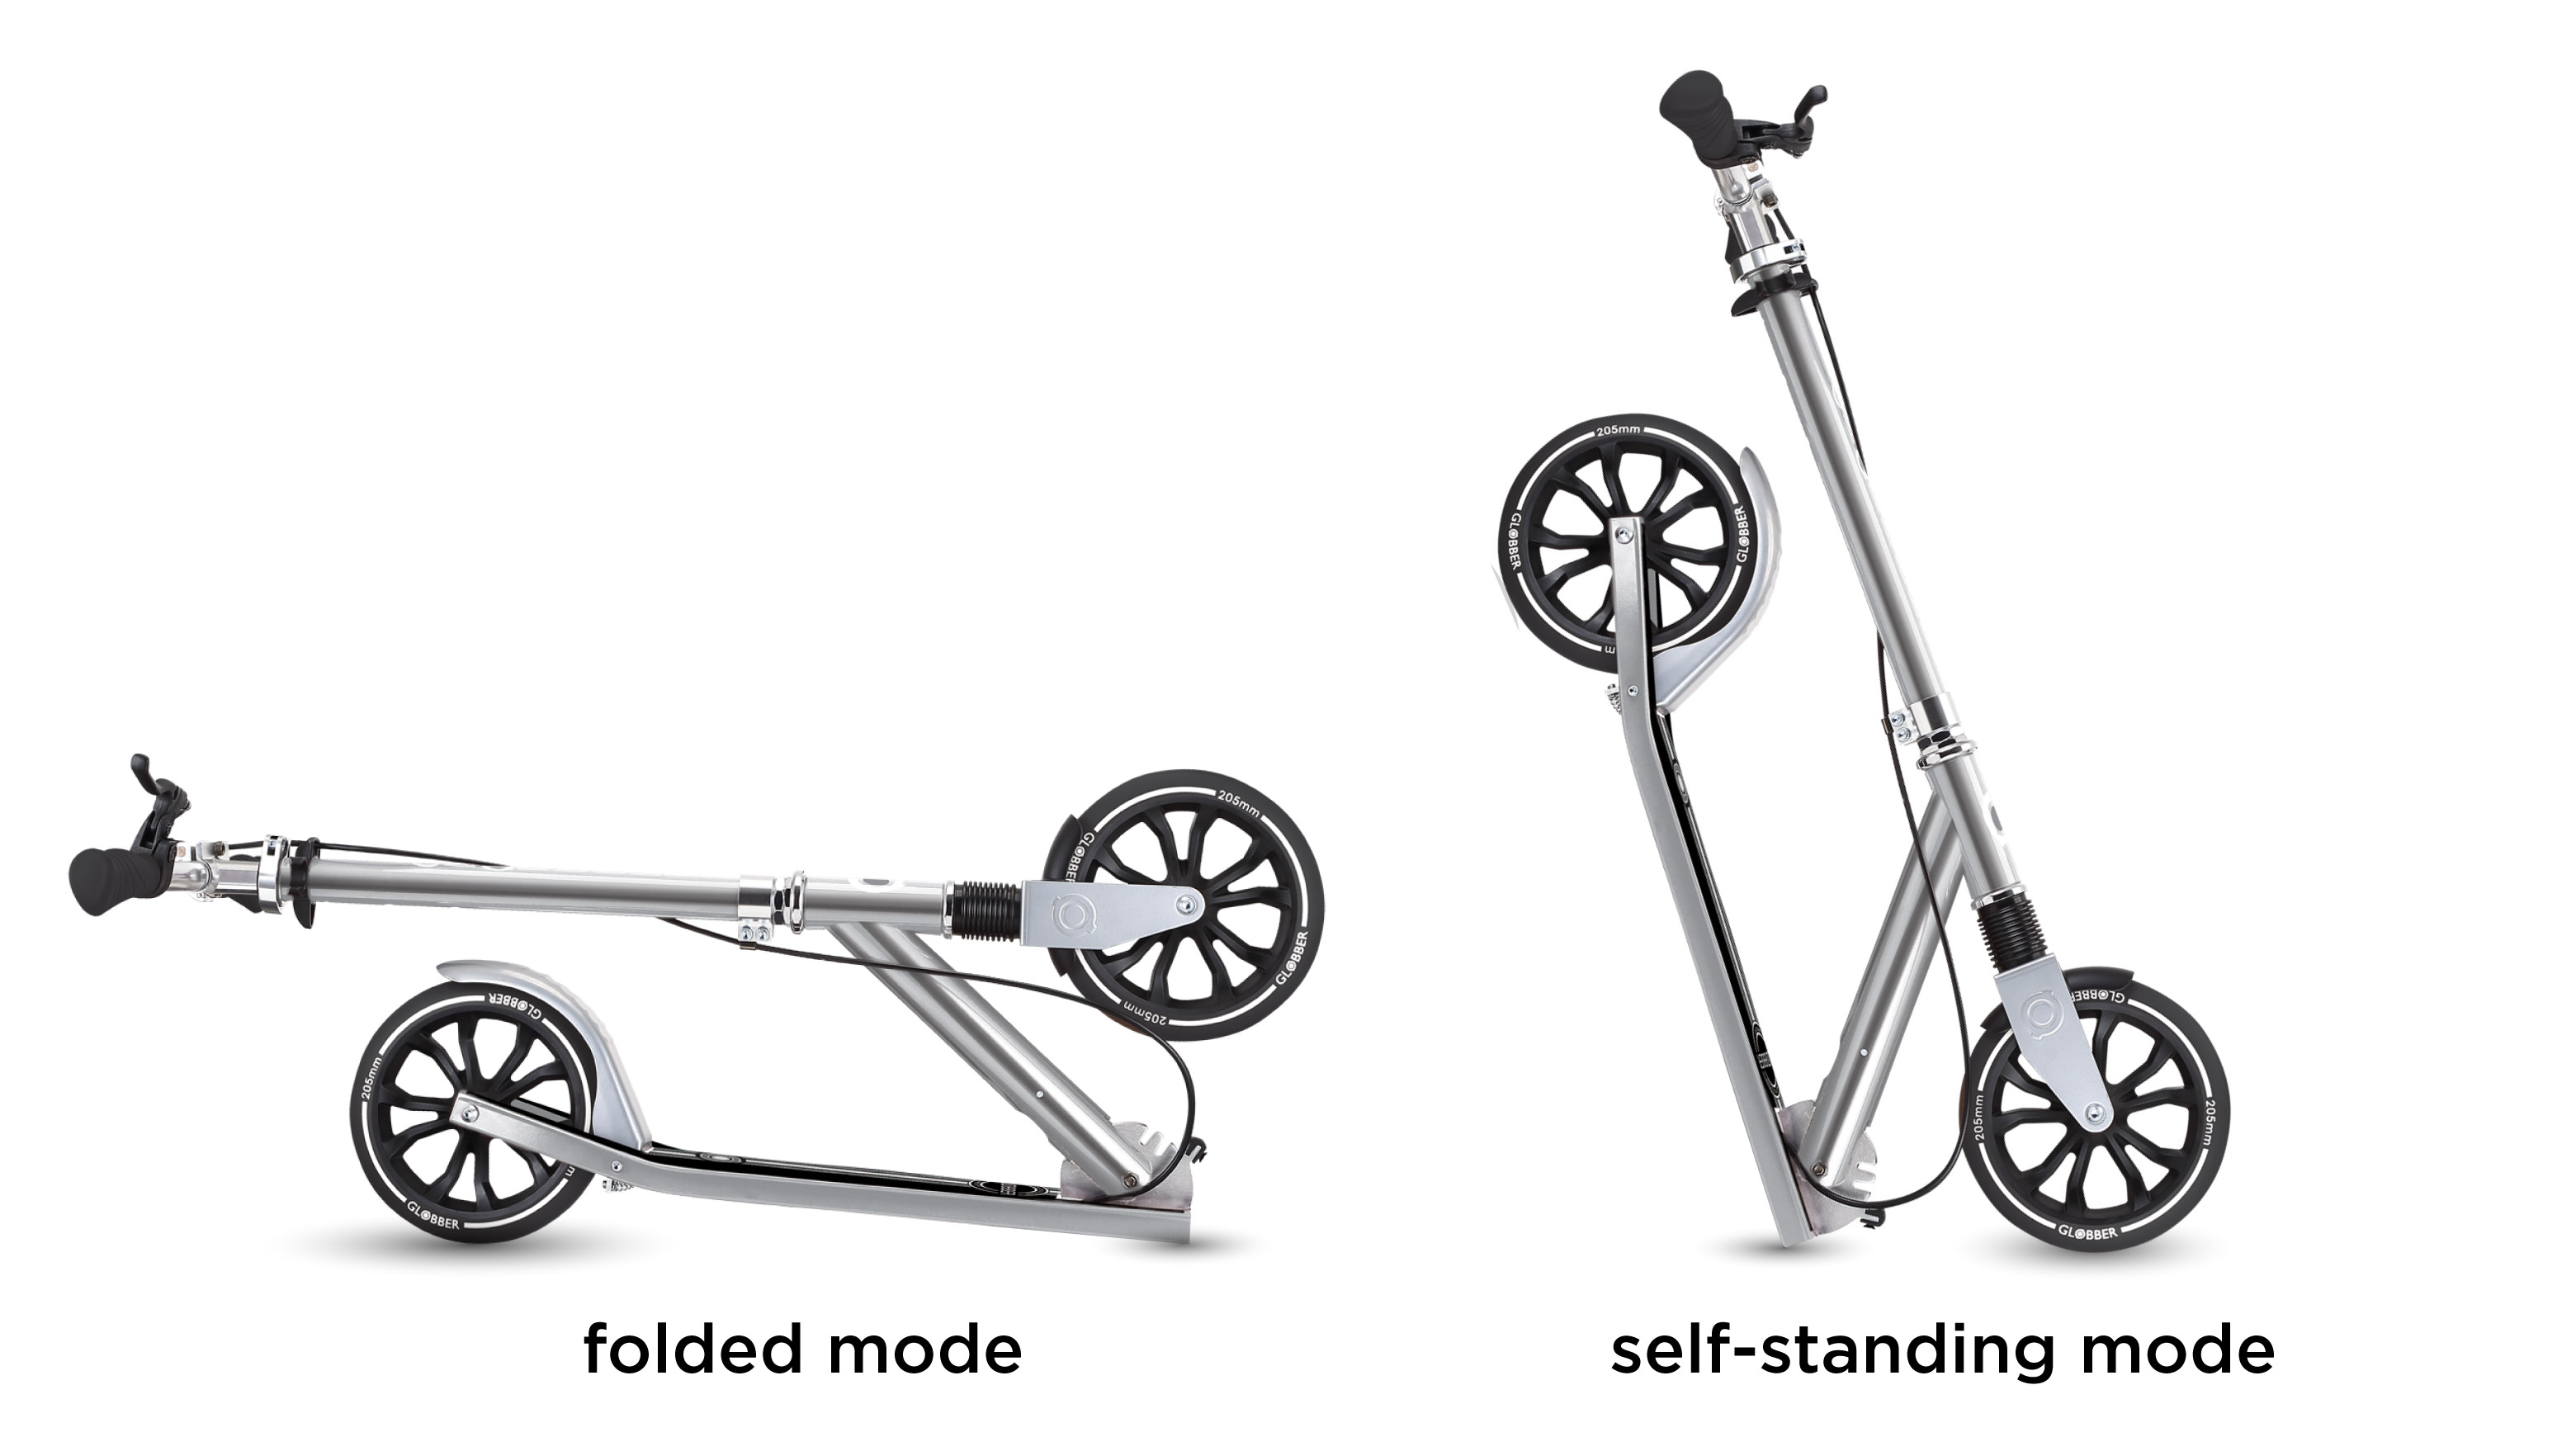 NL big wheel scooter in folded mode and self-standing mode